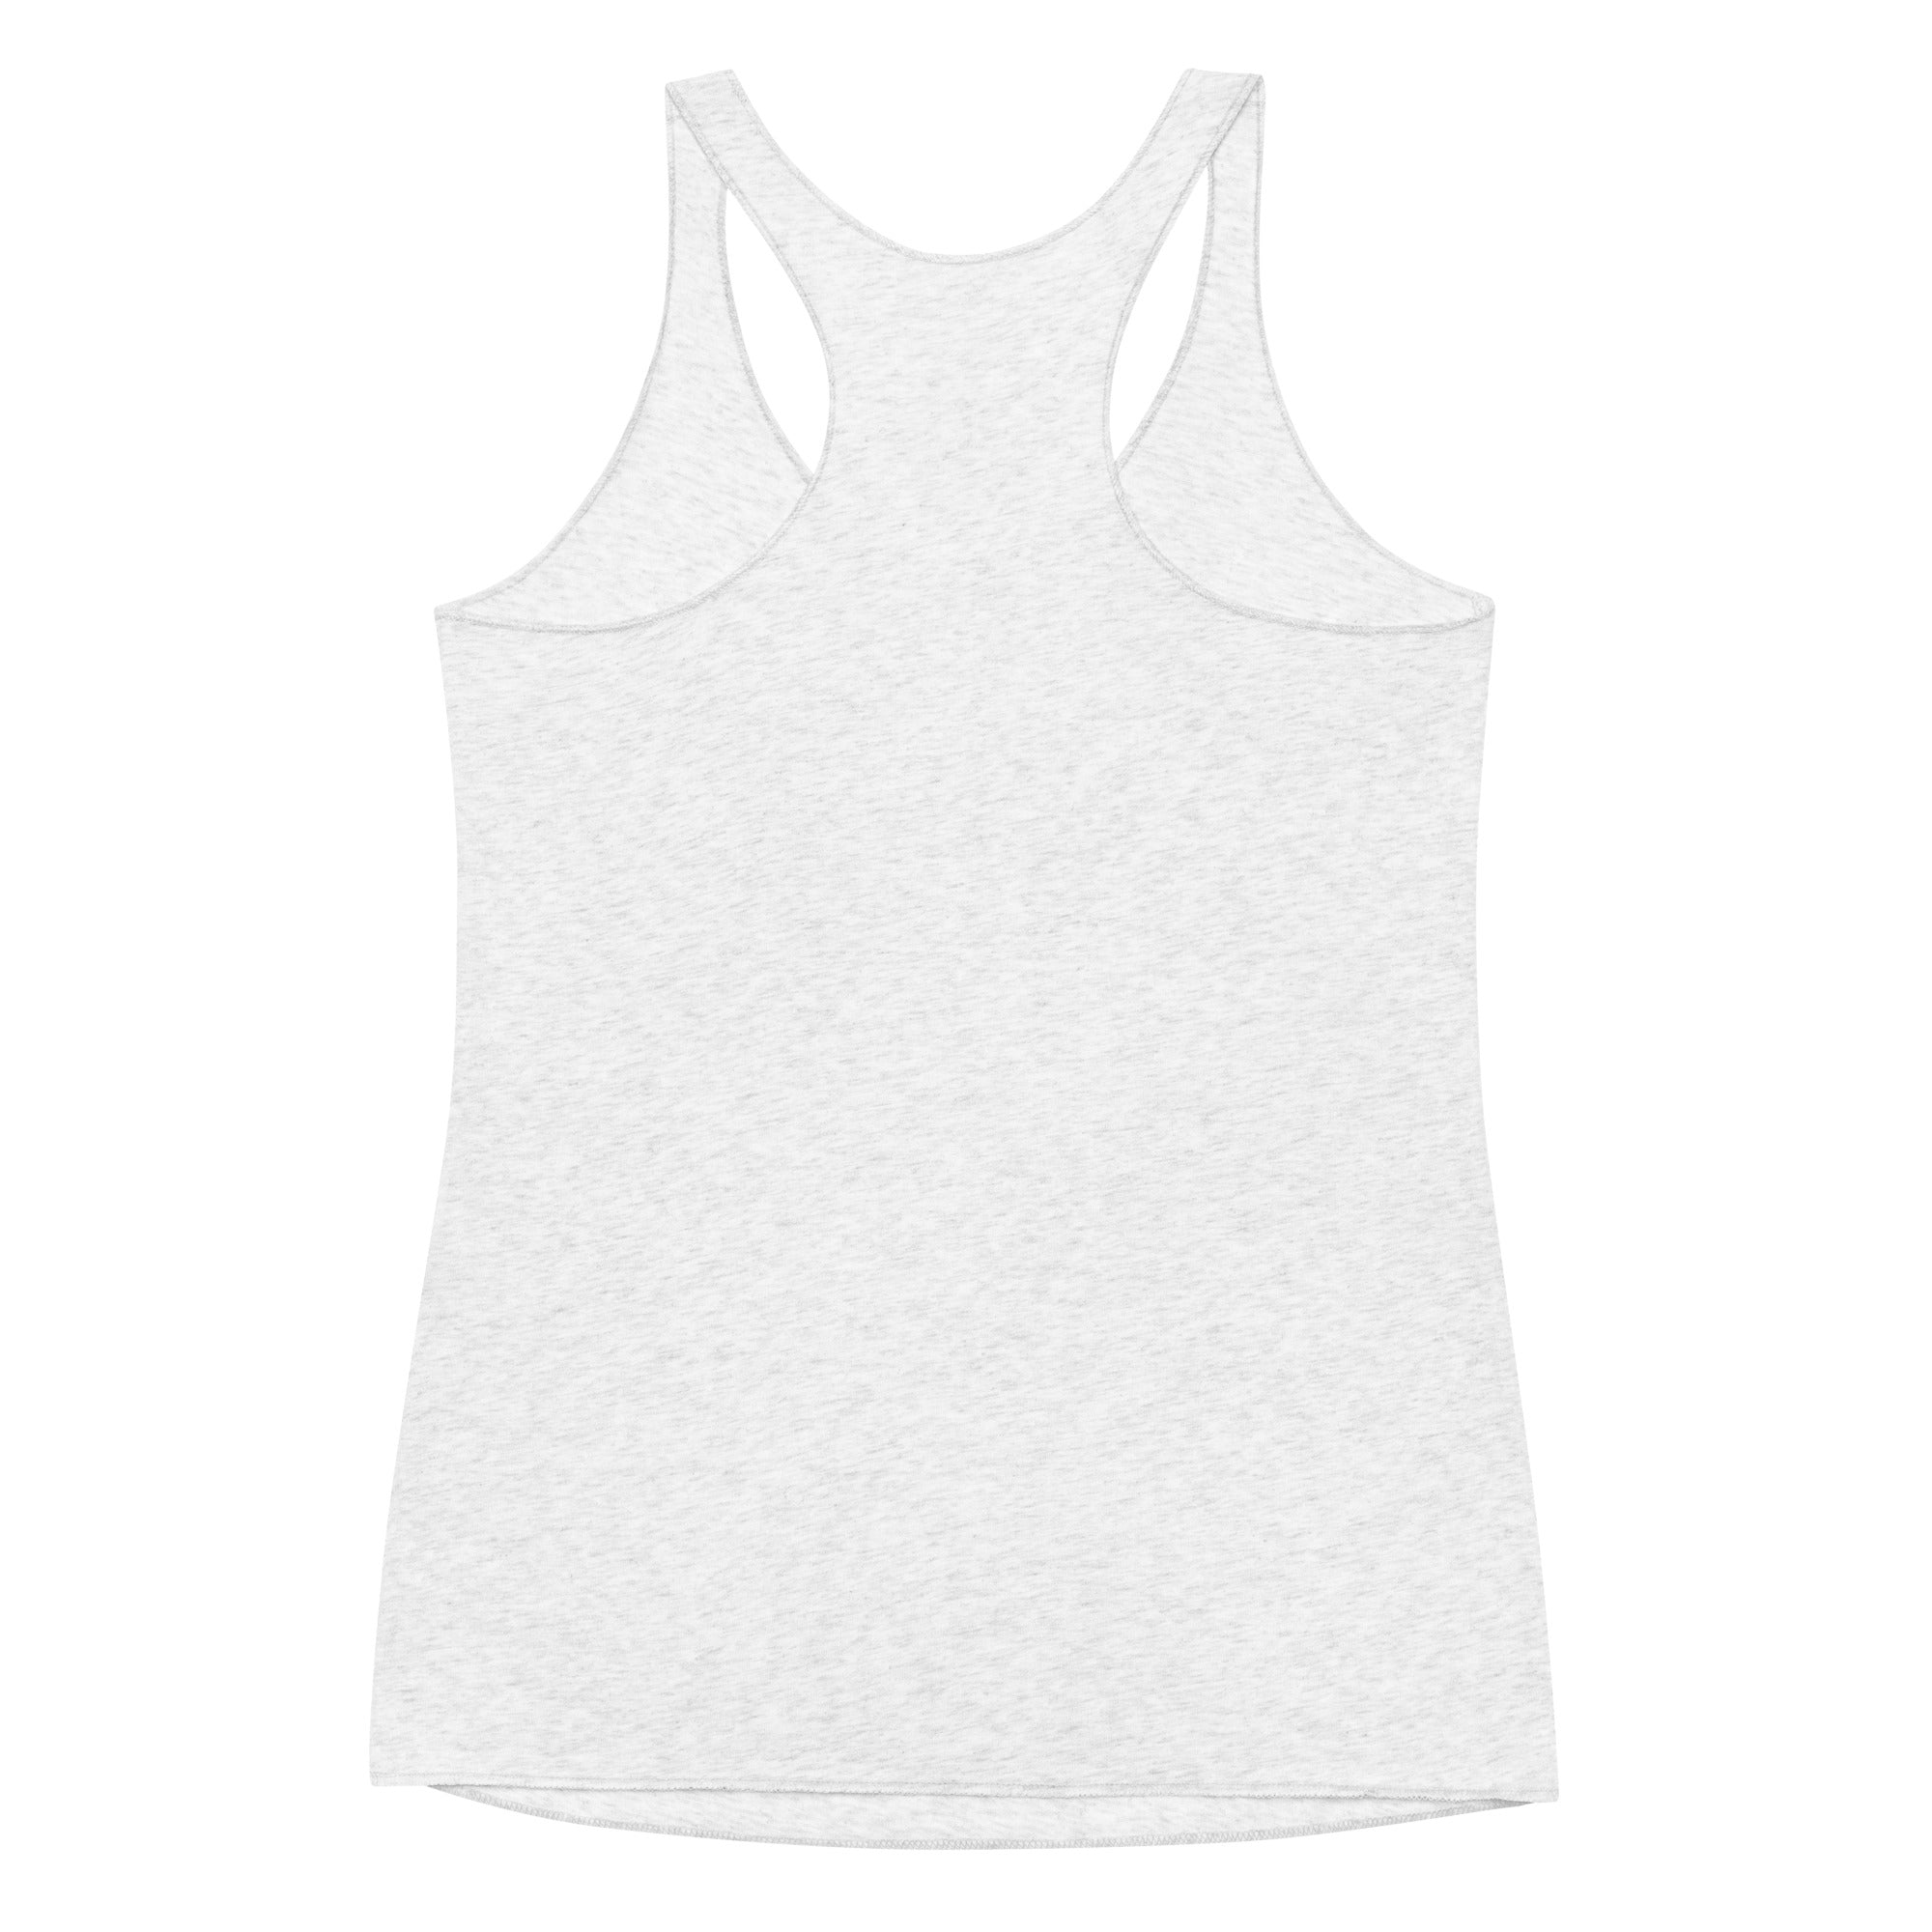 LimeLife by Alcone - Women's Racerback Tank